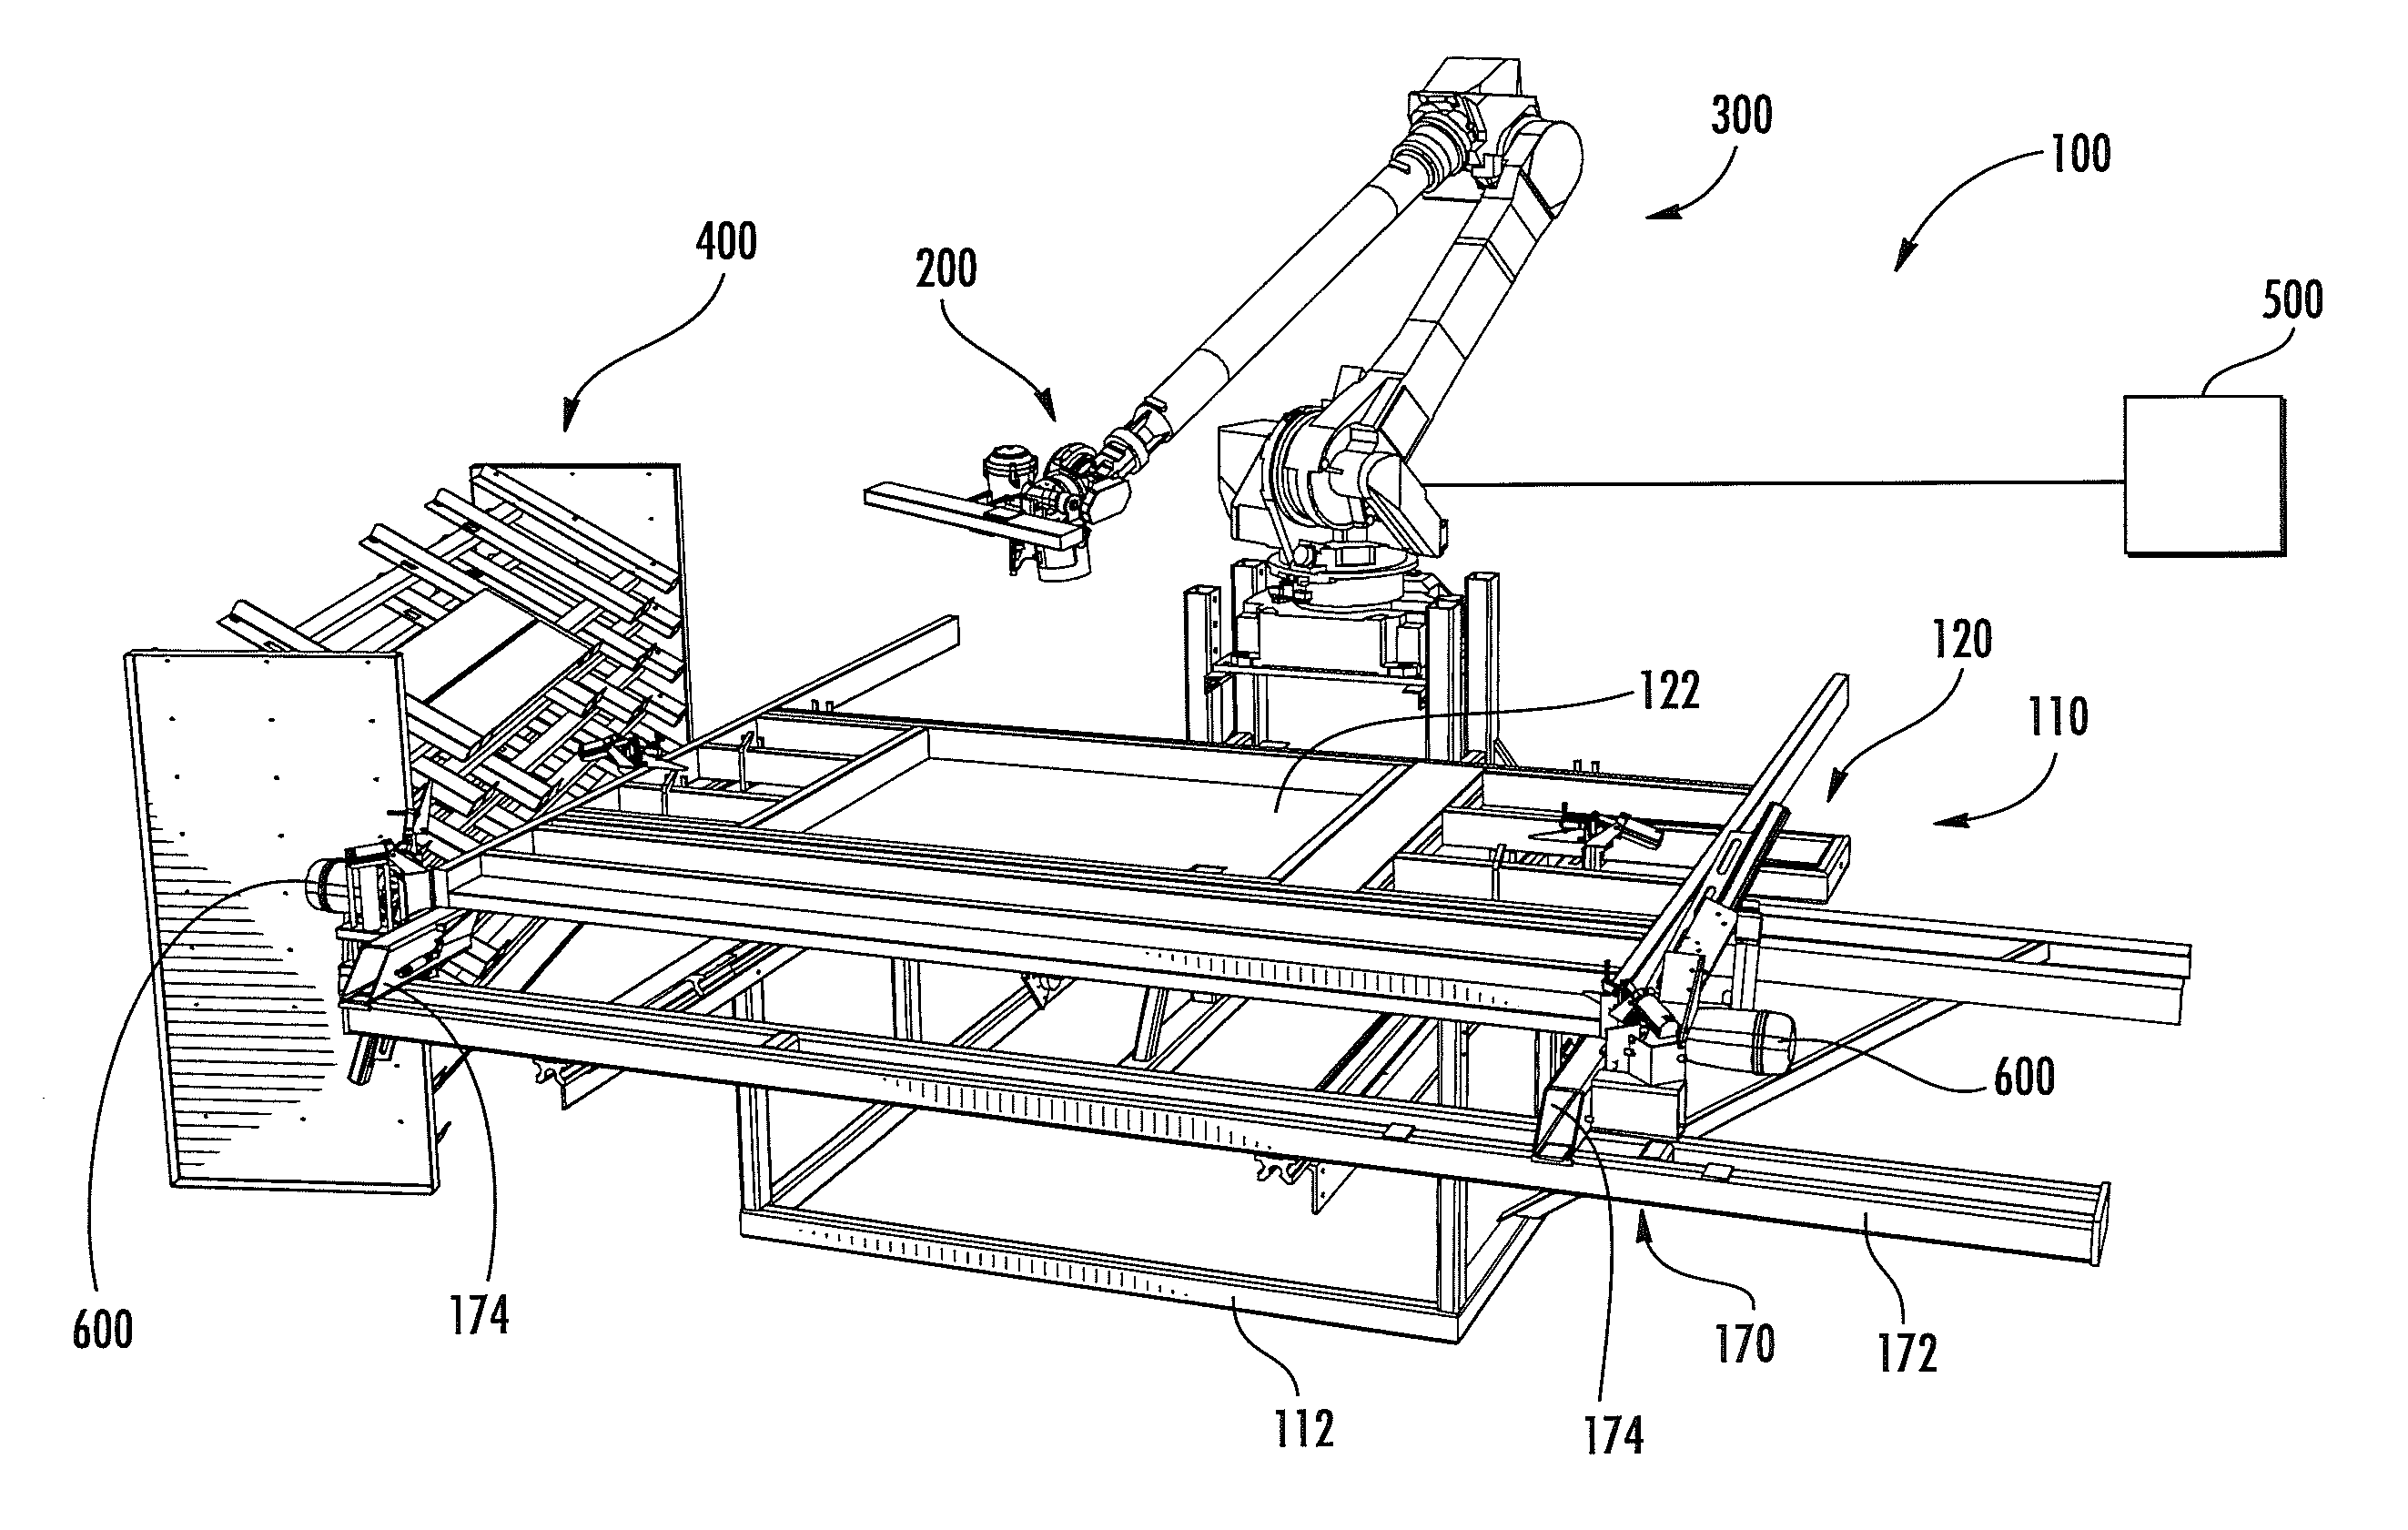 Automated apparatus for constructing assemblies of building components